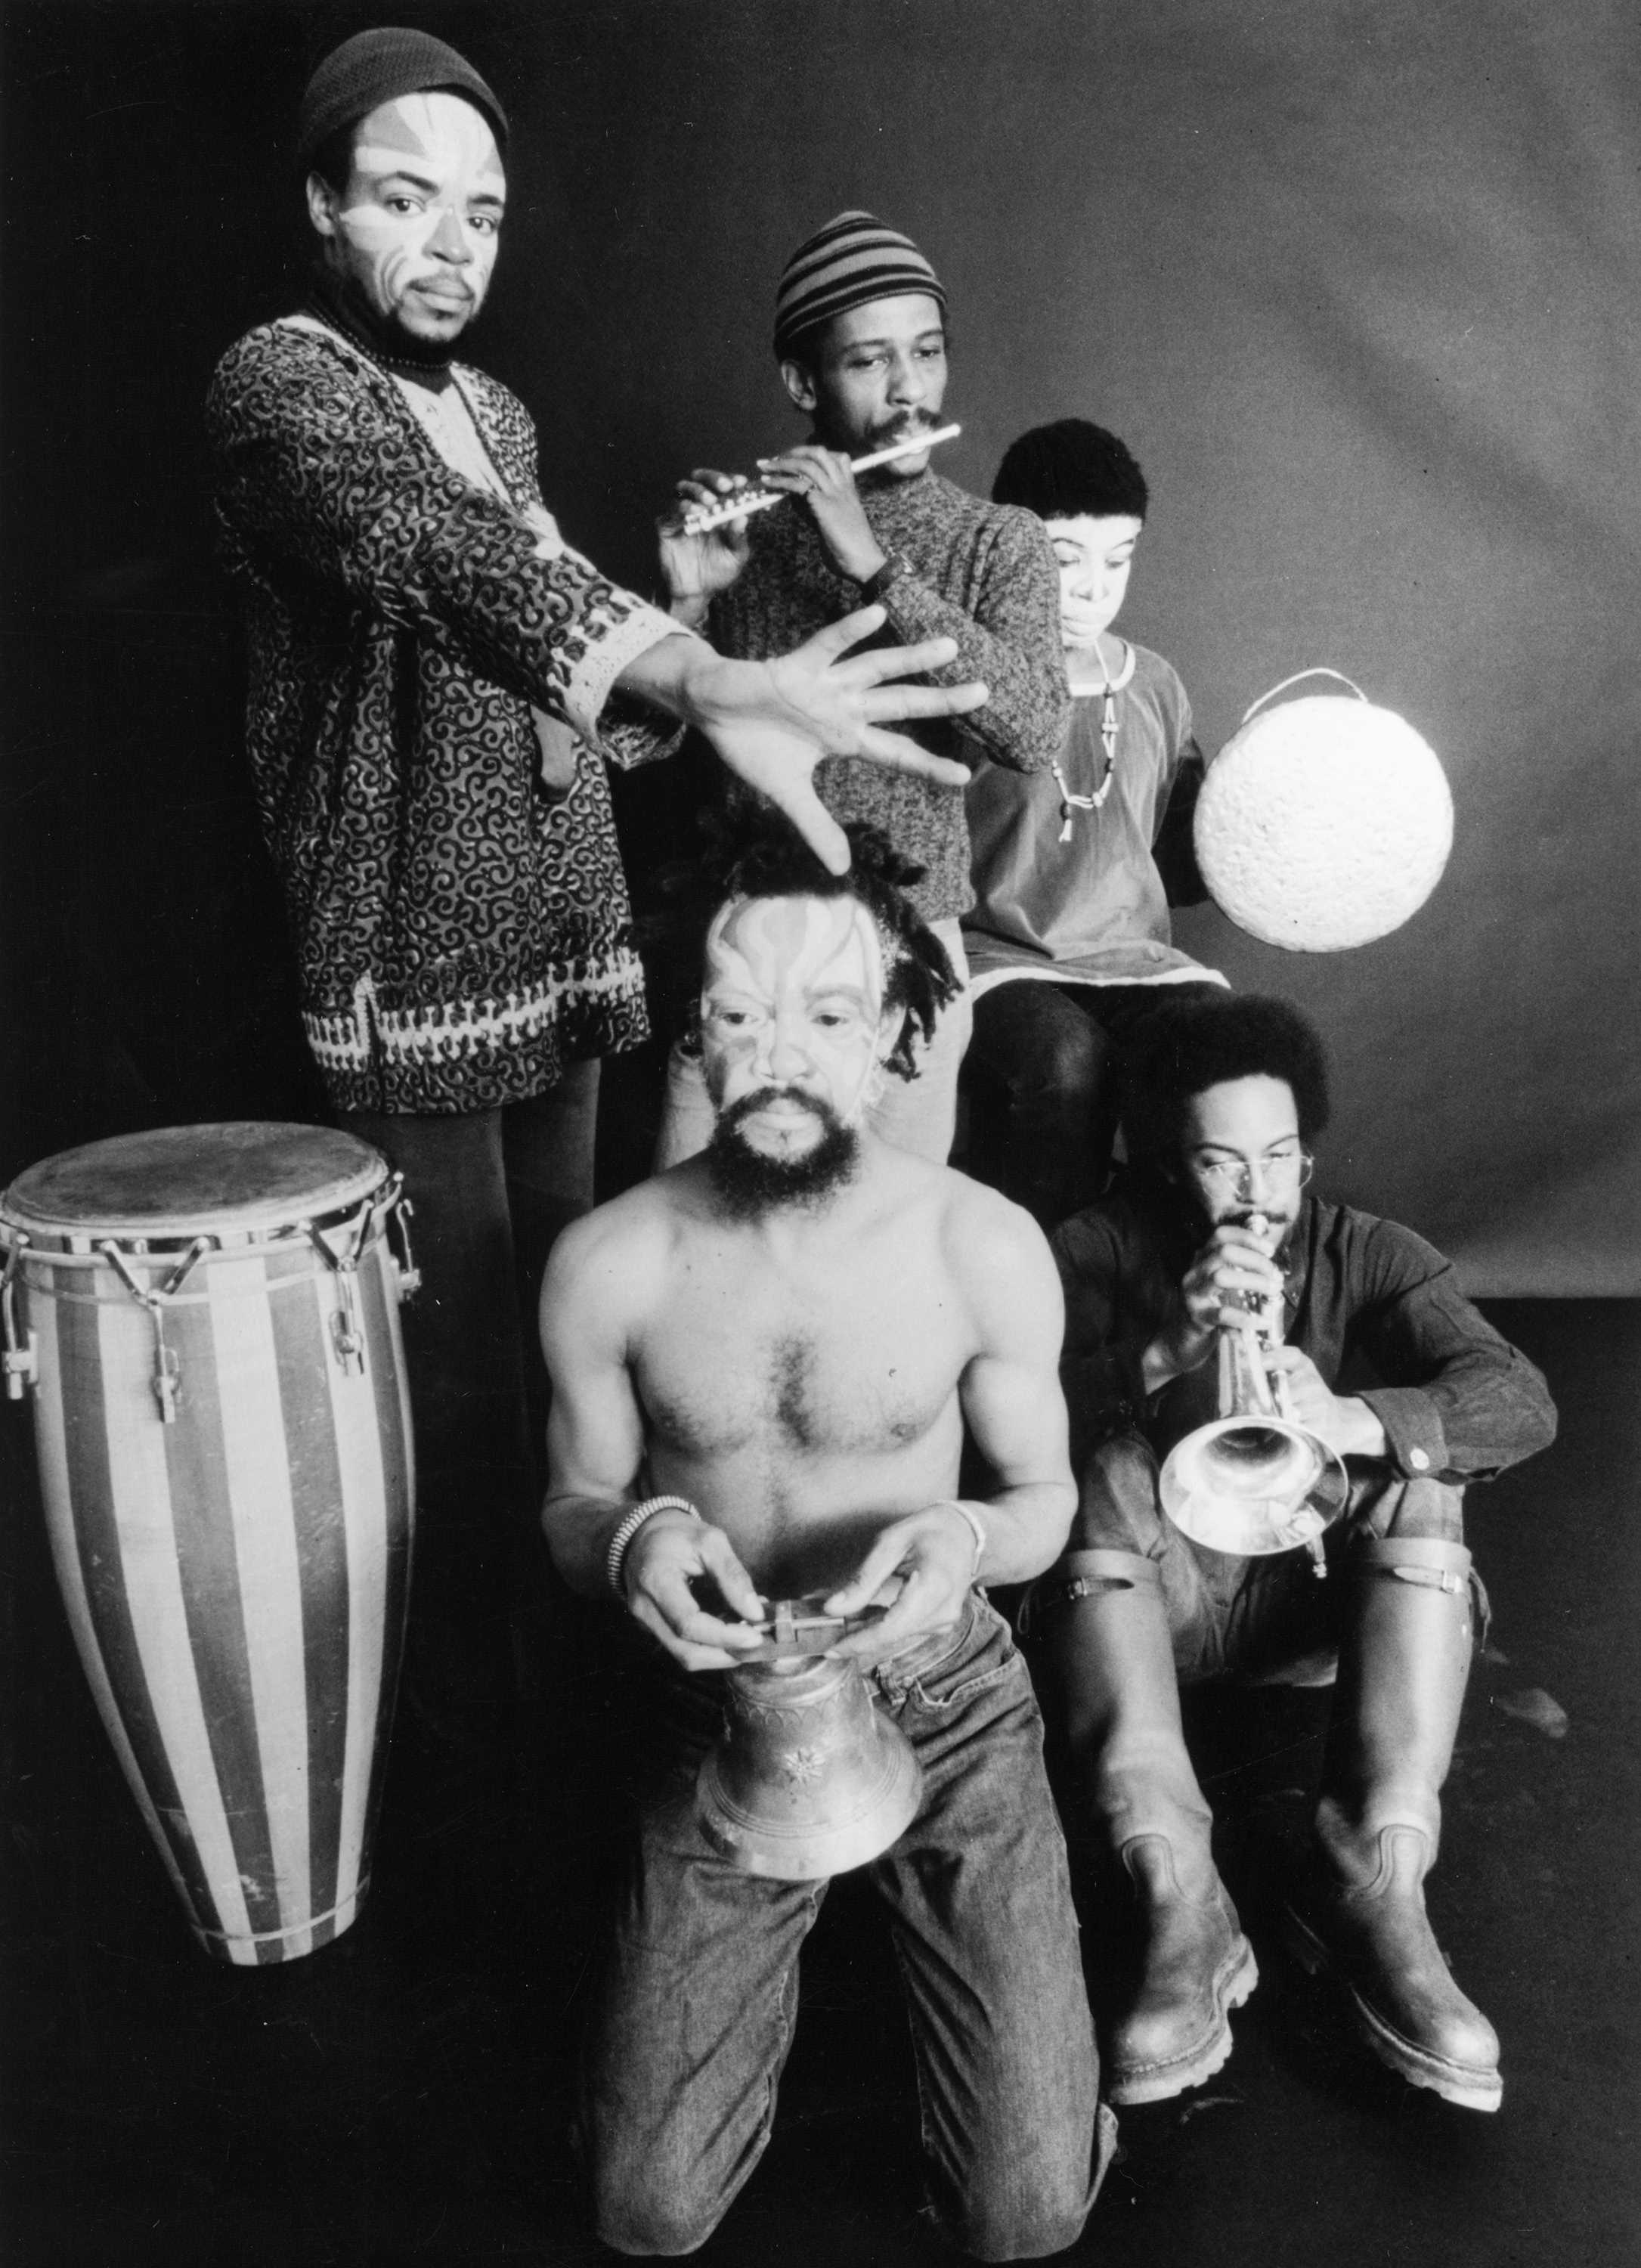 A black and white portrait of the band The Art Ensemble of Chicago. Each posed with their instruments in different postures.